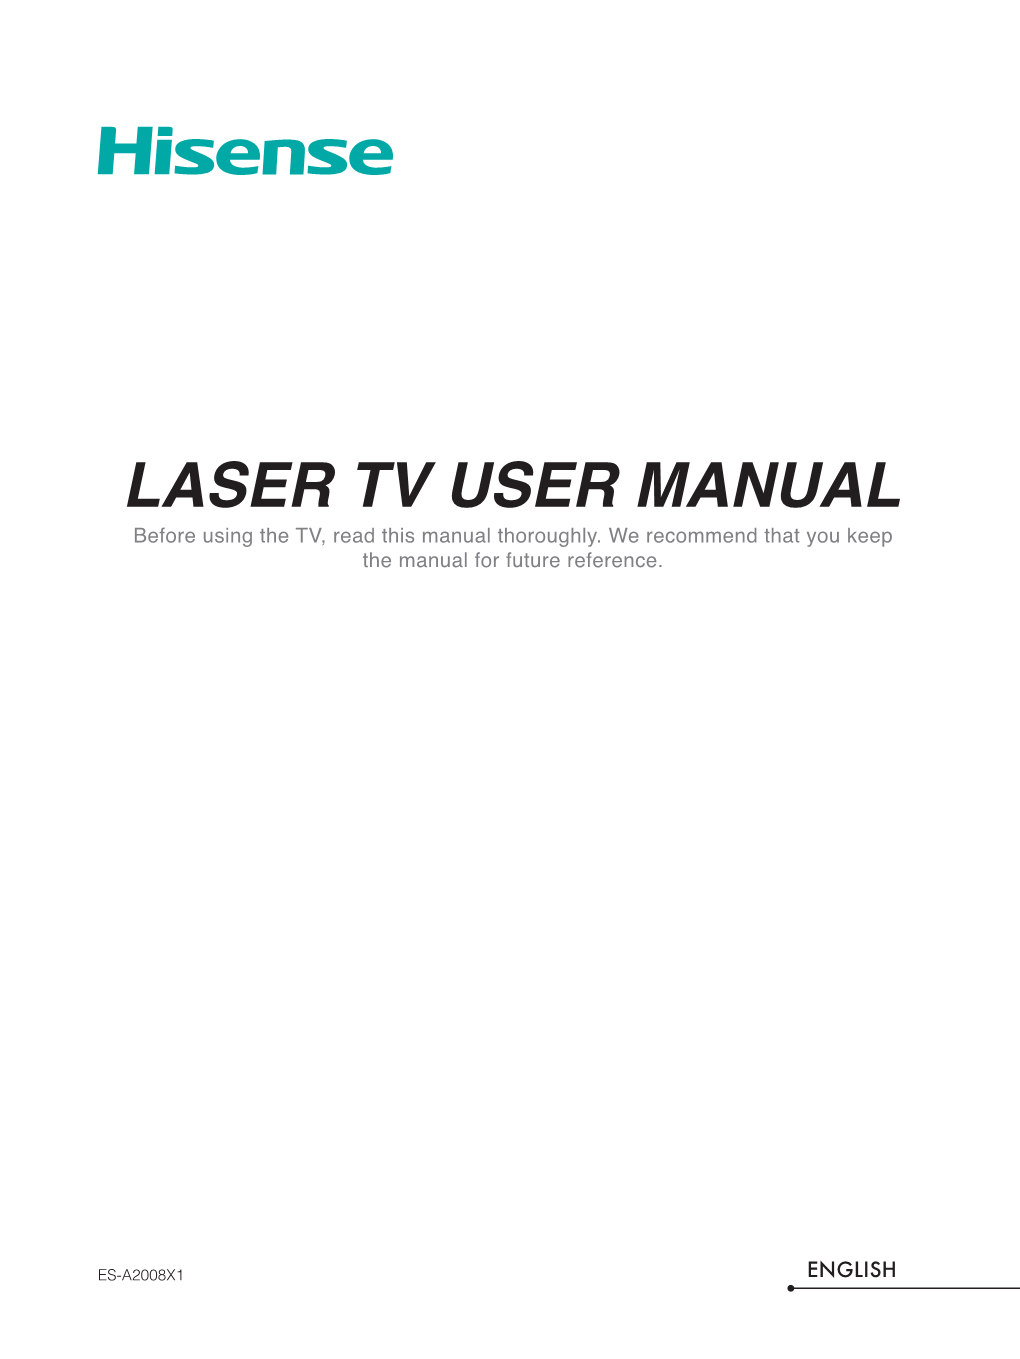 LASER TV USER MANUAL Before Using the TV, Read This Manual Thoroughly